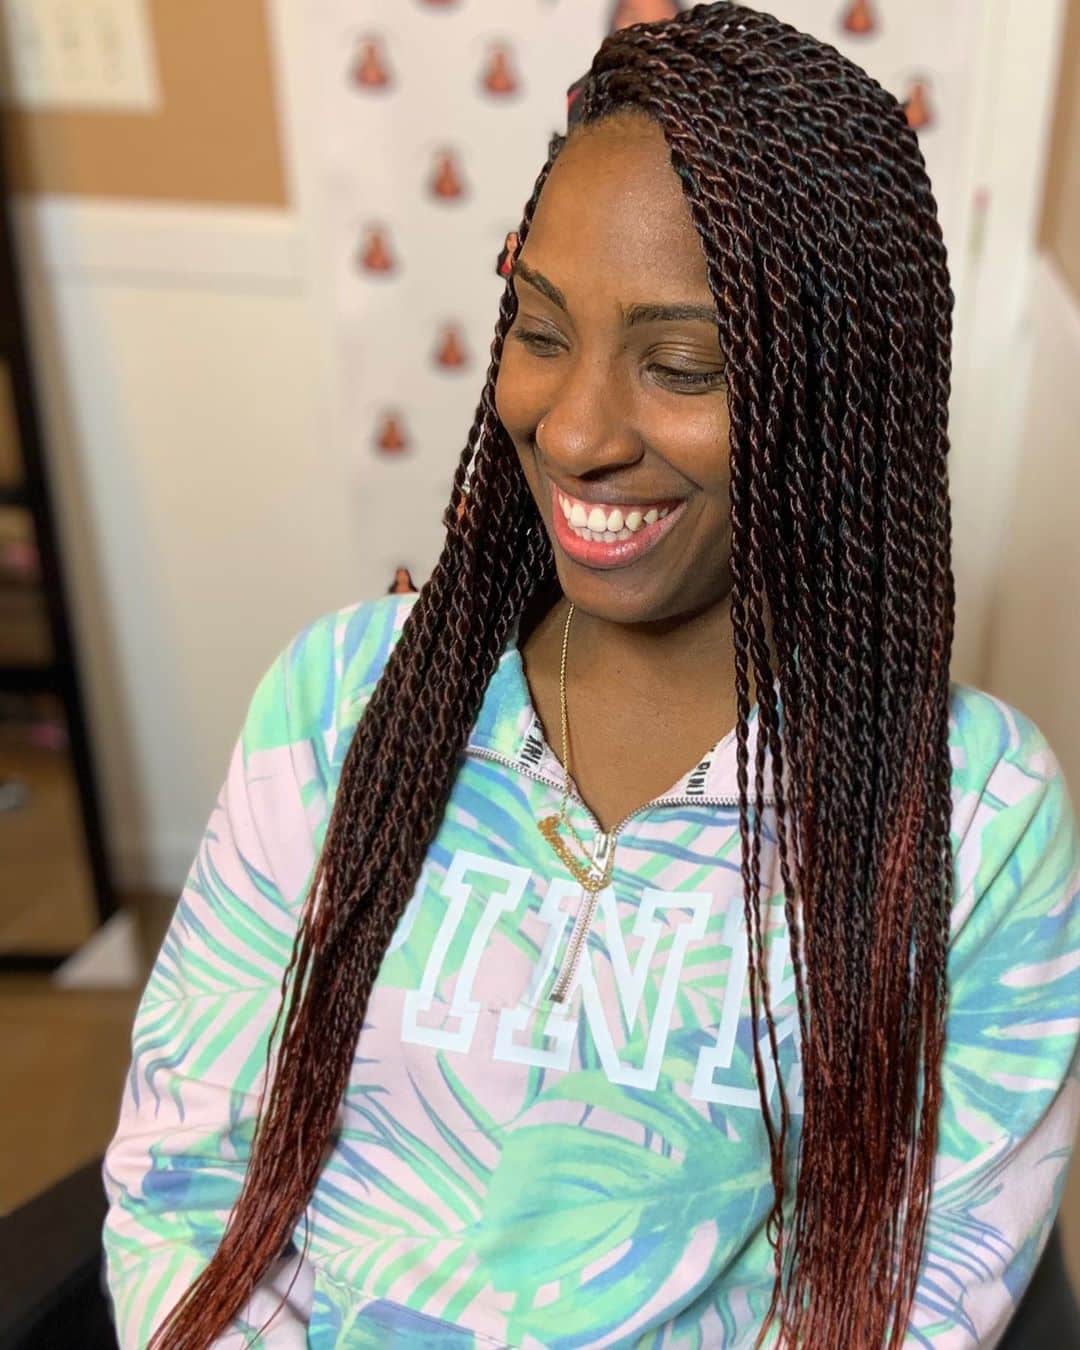 Too tired of everyday styling? If so, the perfect time to wear these gorgeous Senegalese twists is now. Take a break from heat-styling tools as this look can grant you the same elegance. Wanting the long hair with hints of red? You can now achieve your desired outcome without damaging your locks.